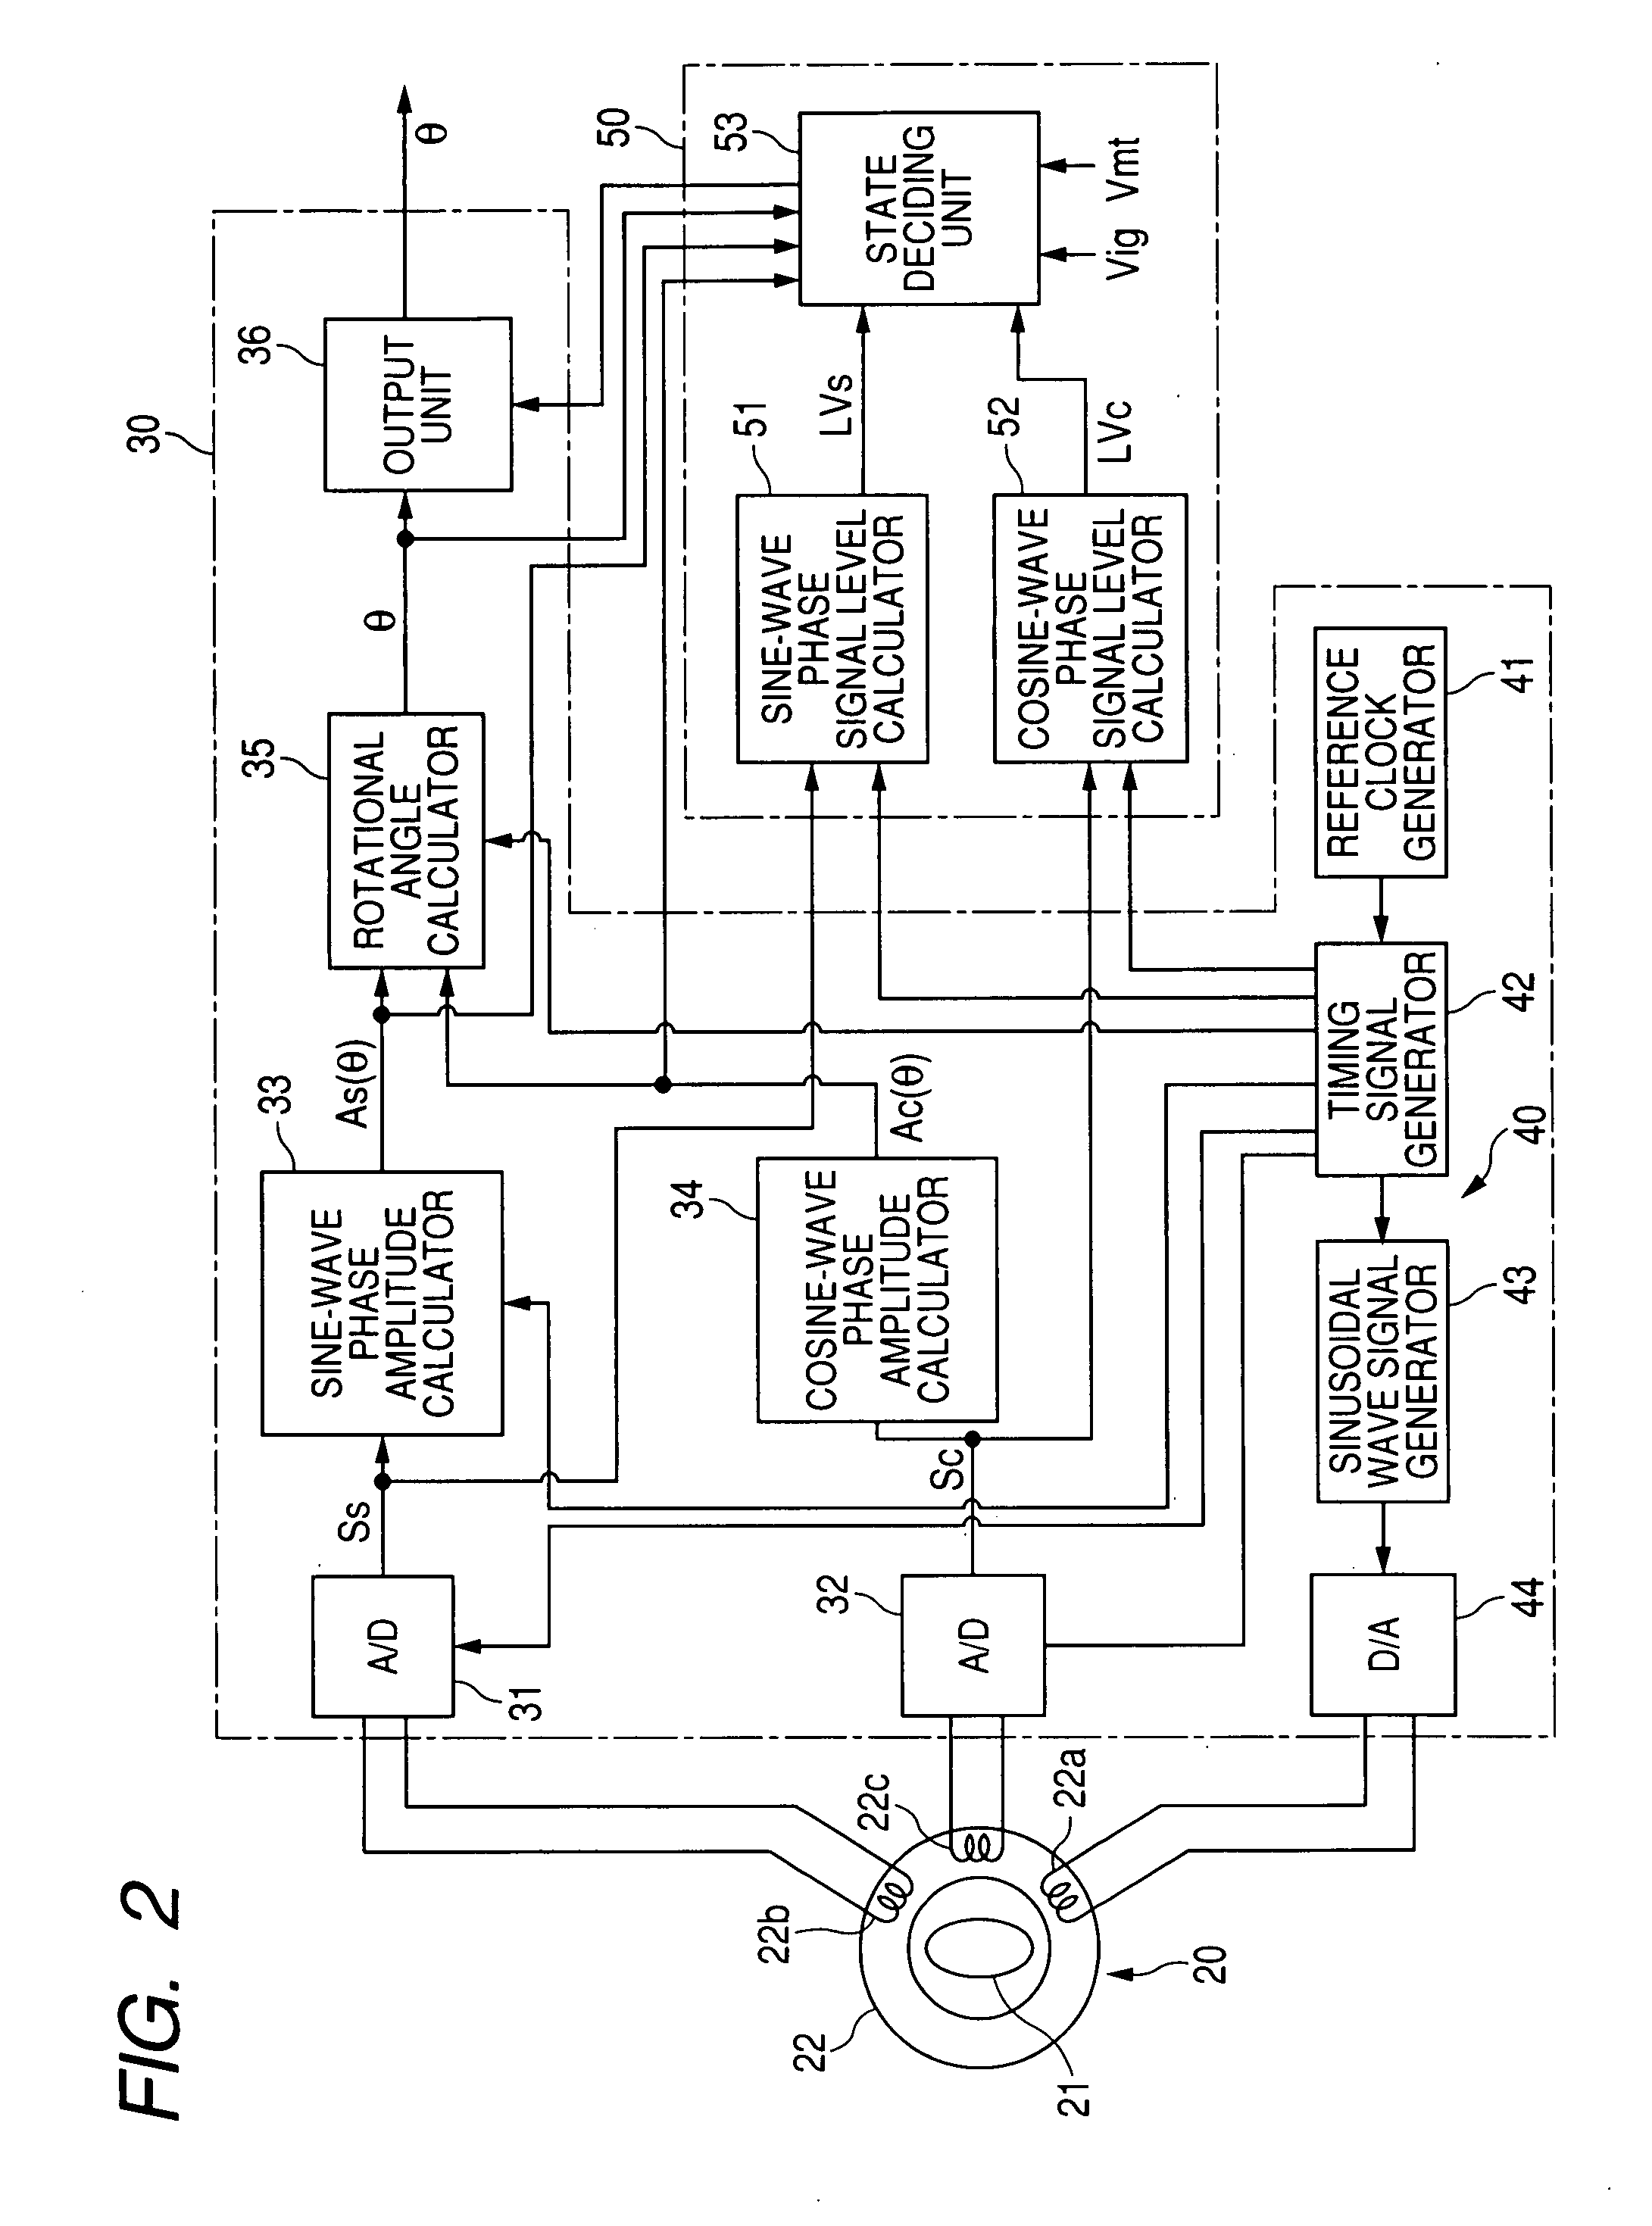 Fault detection unit for rotation angle detecting device